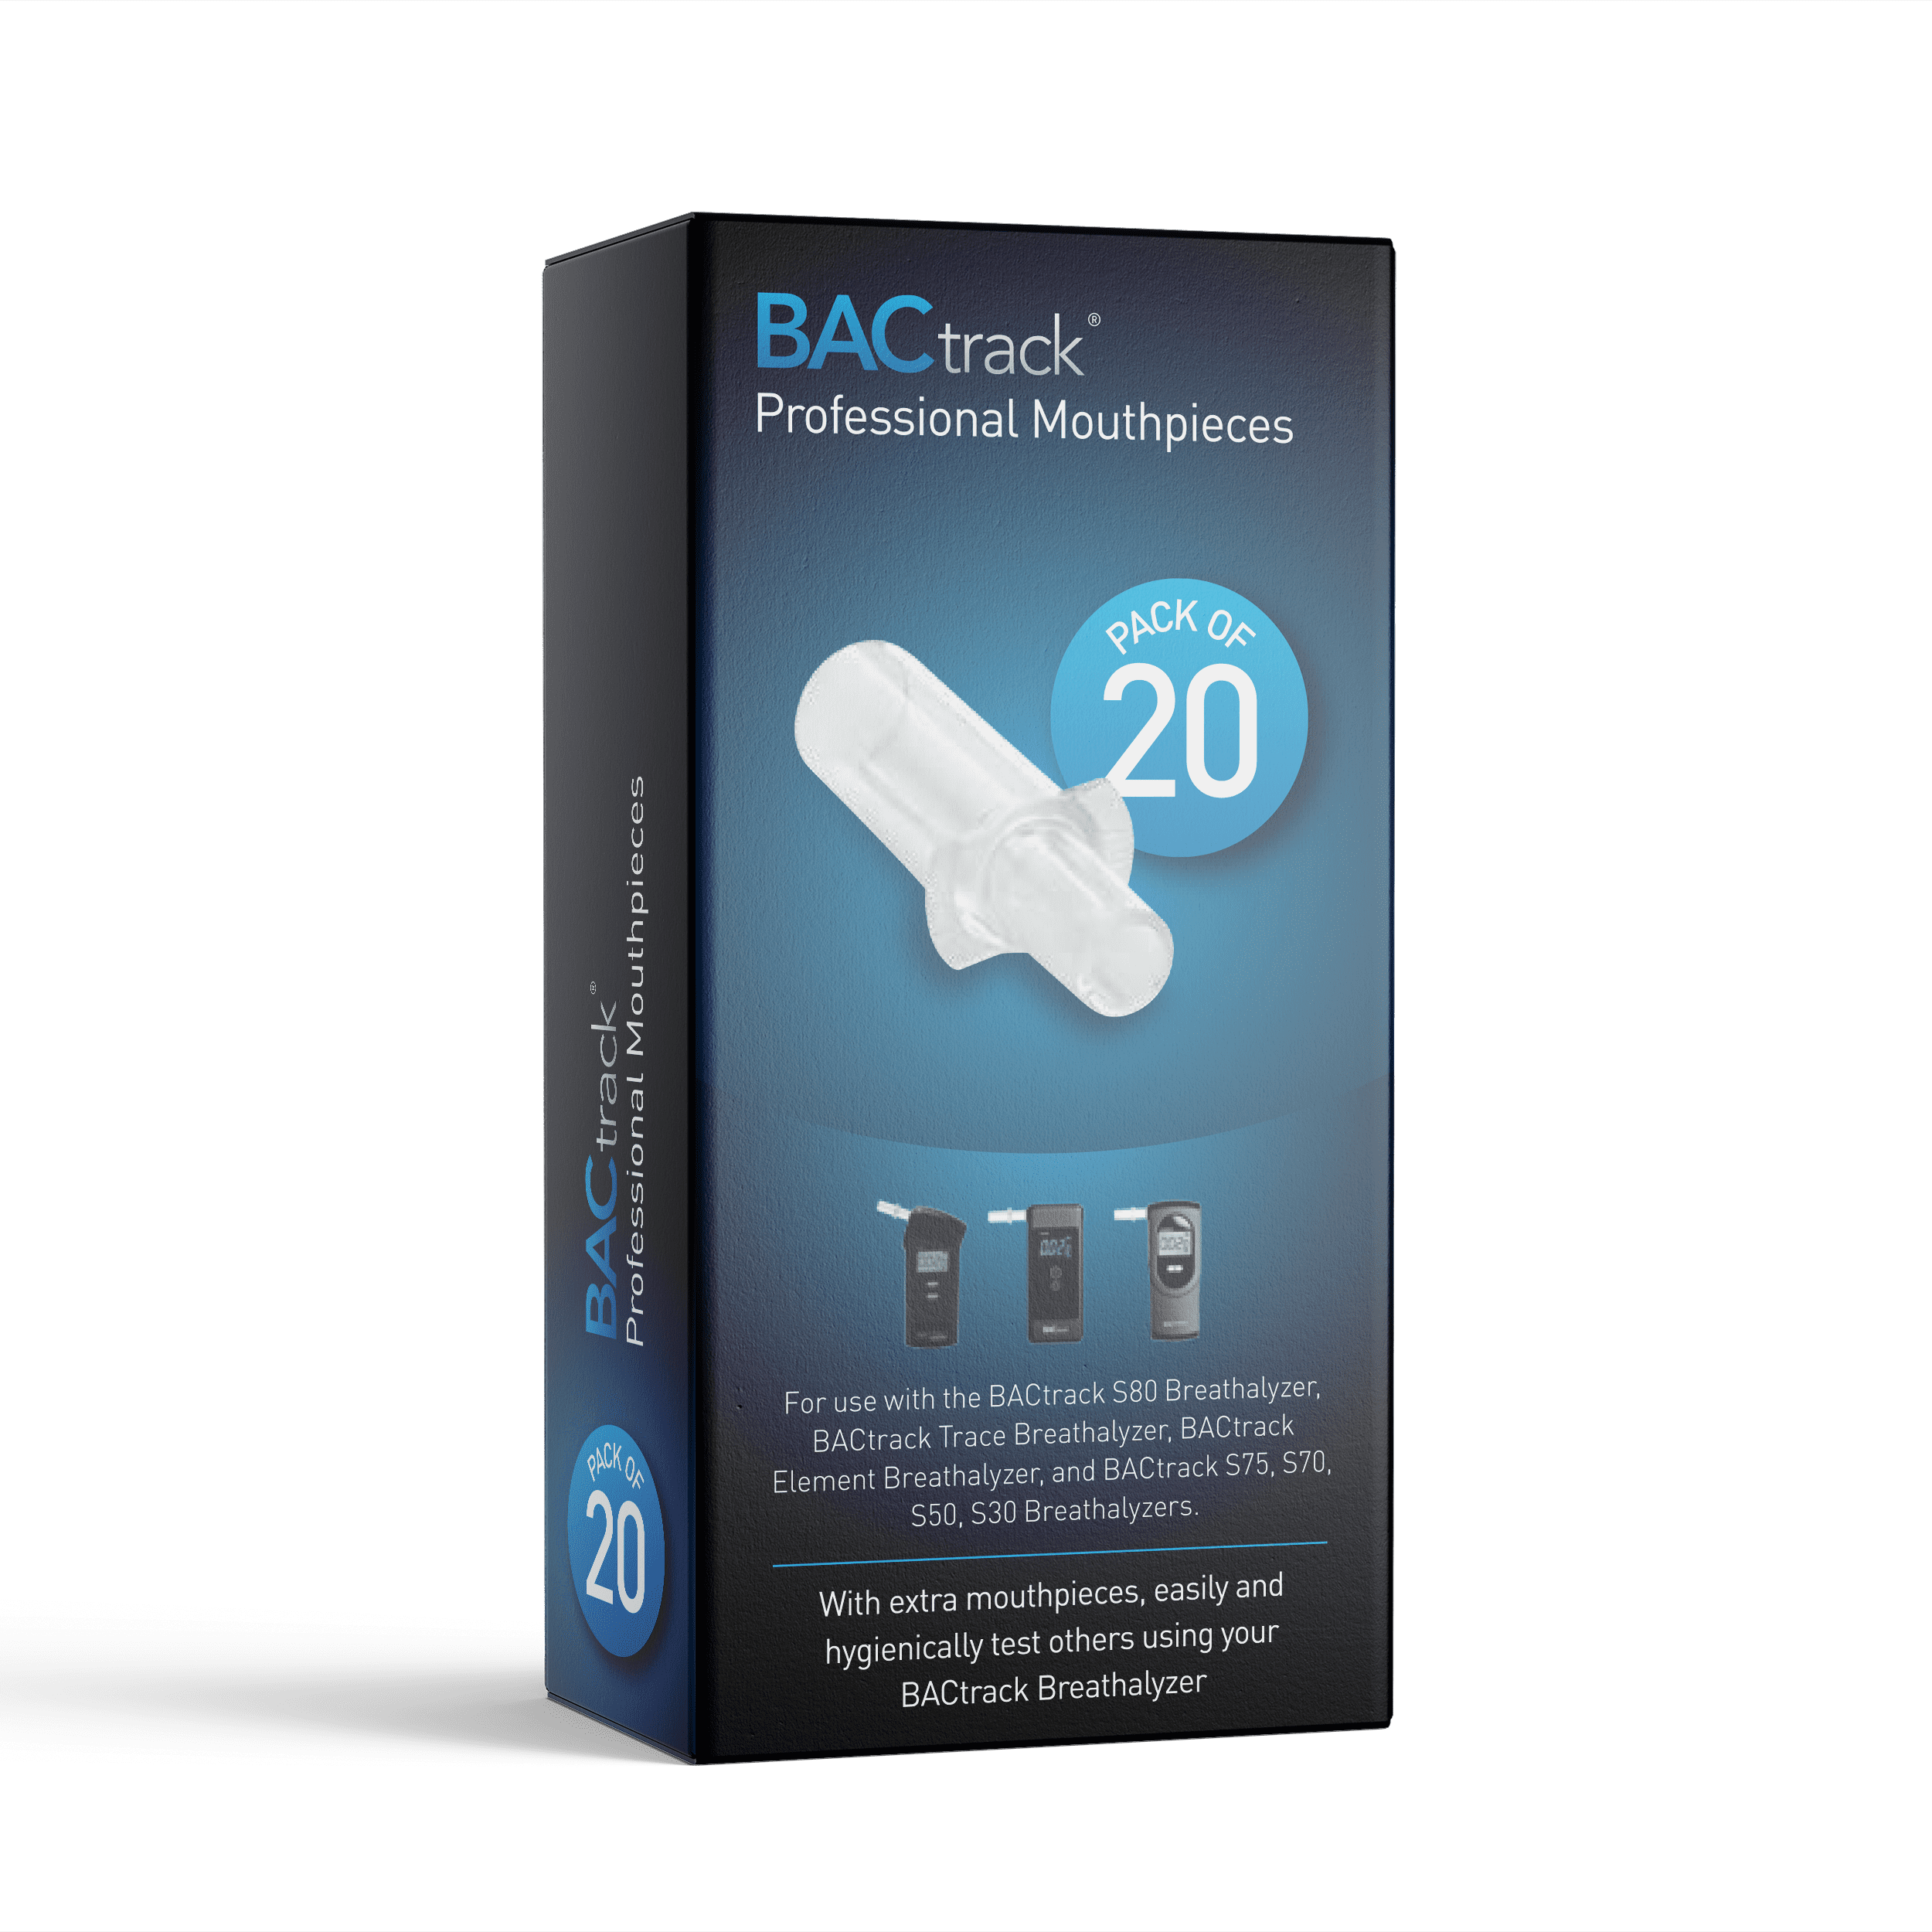 BACtrack Professional Mouthpieces - 20 Pack